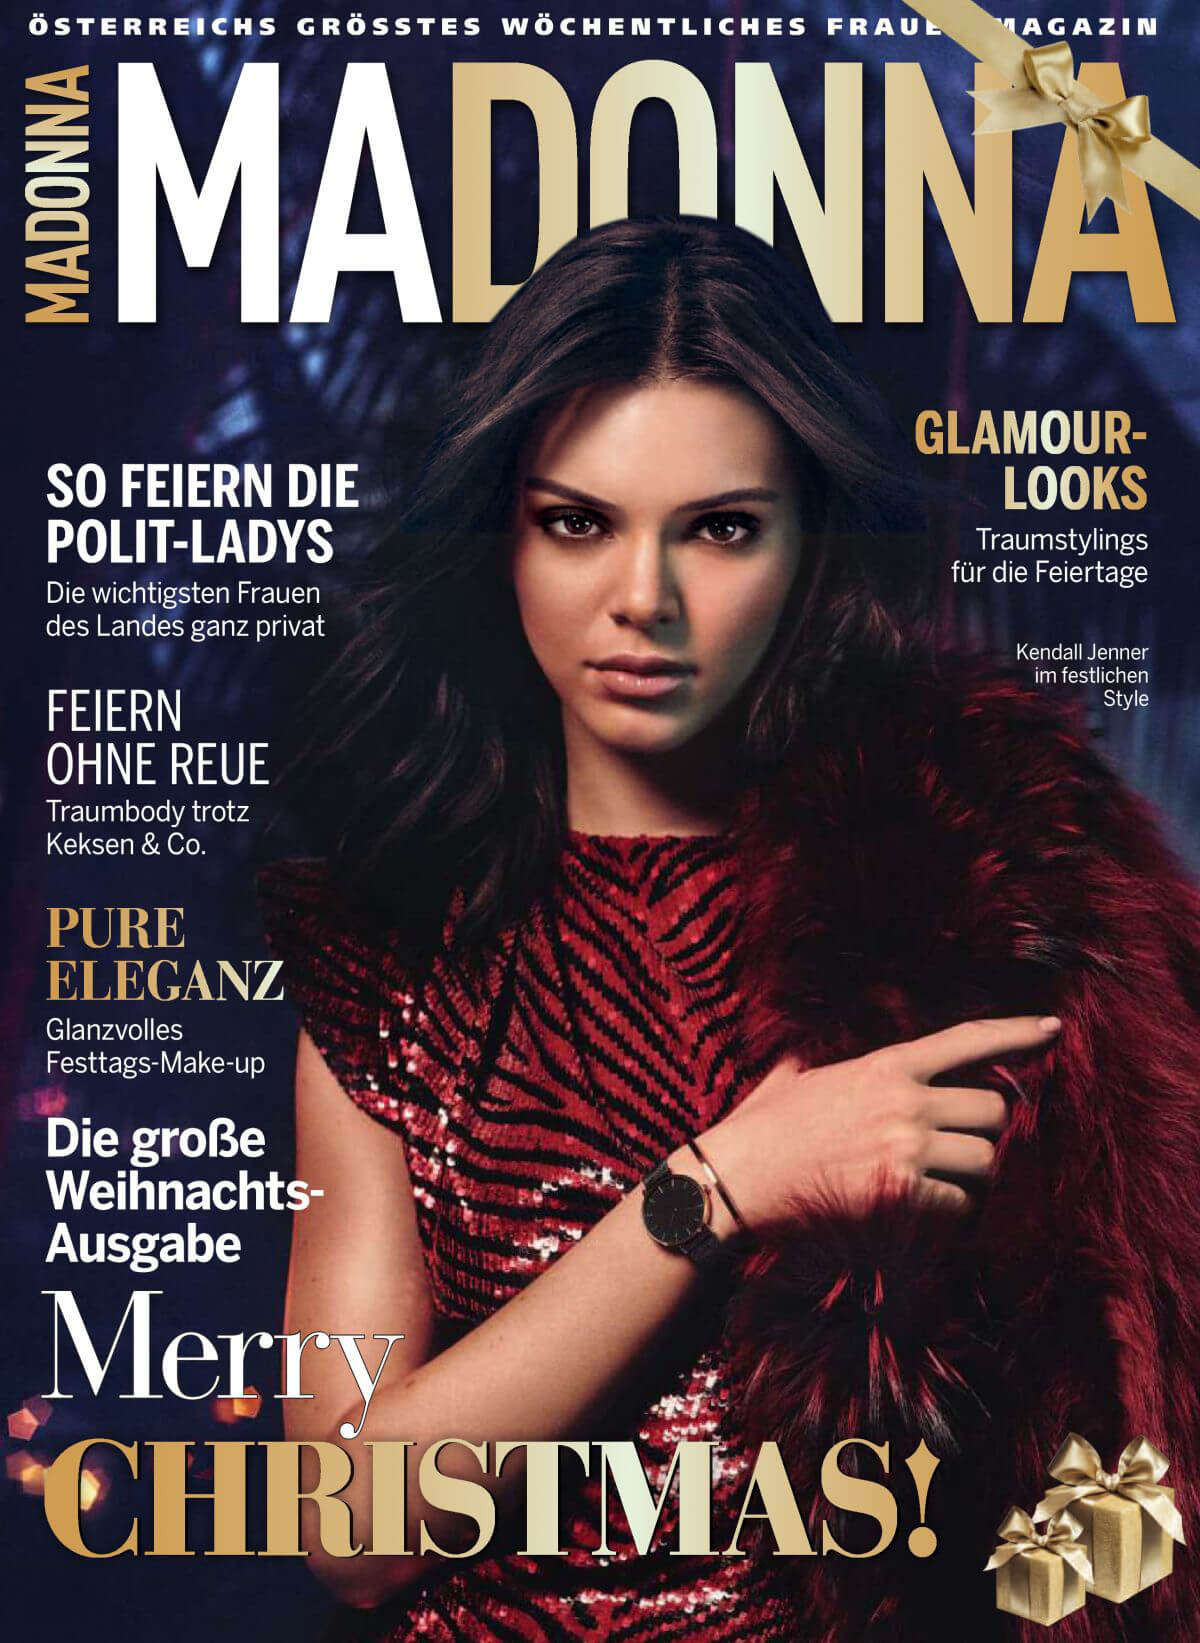 Kendall Jenner on the Cover of Madonna Magazine, December 2018